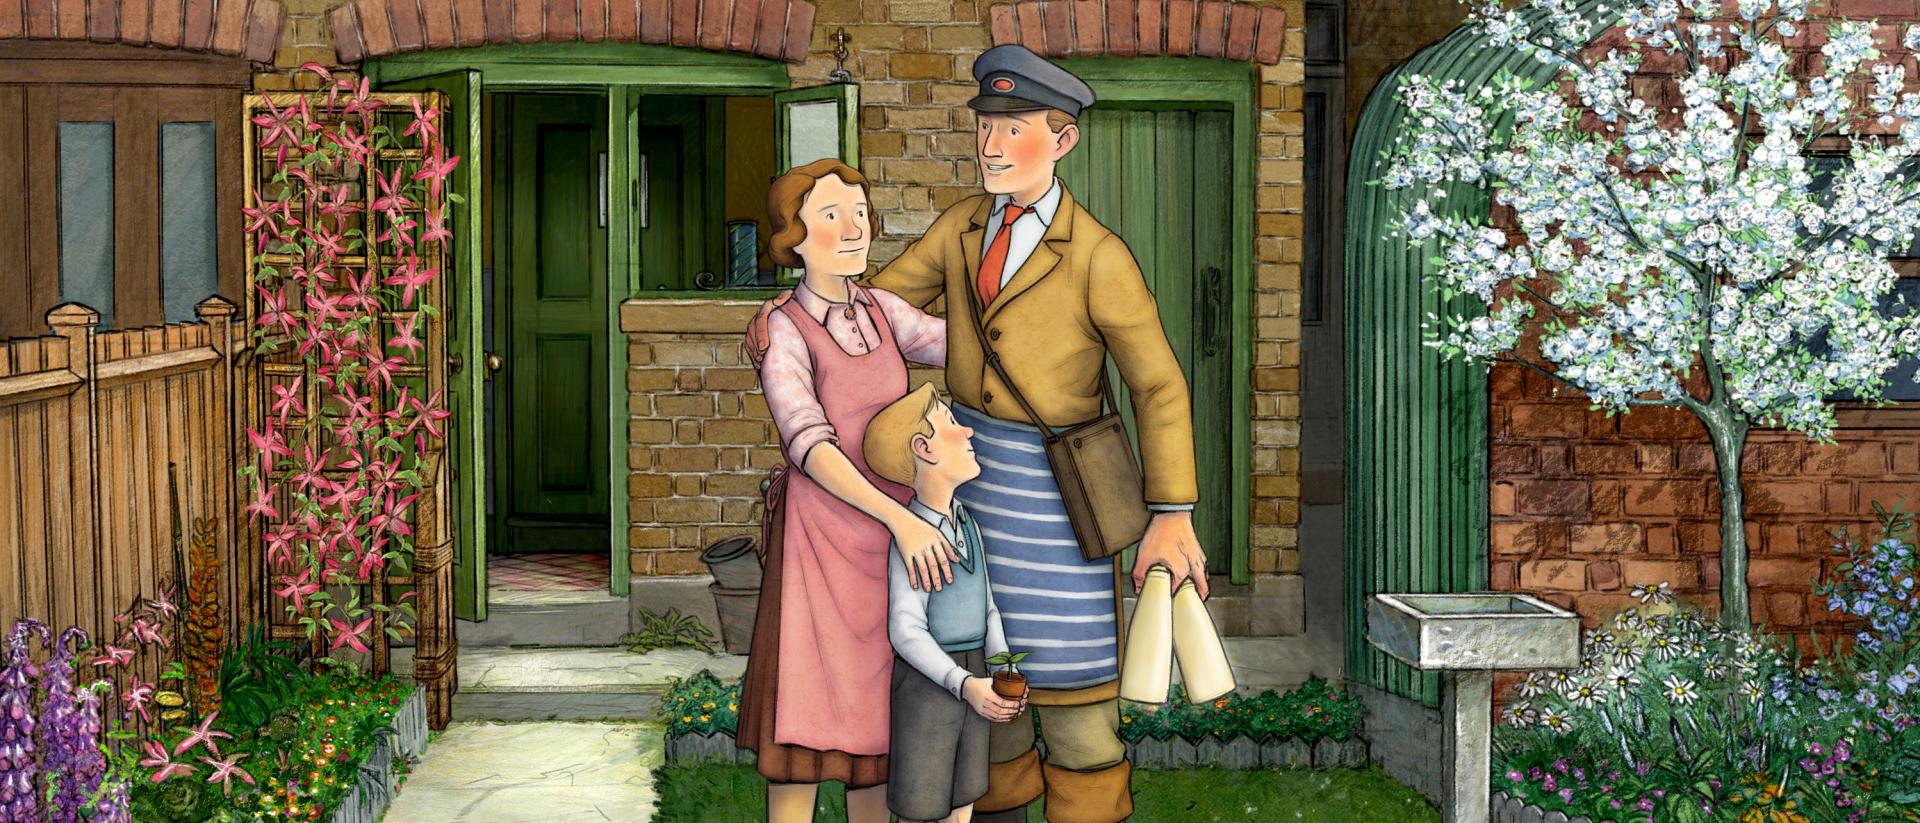 ethel, ernest and their son embracing in their front garden